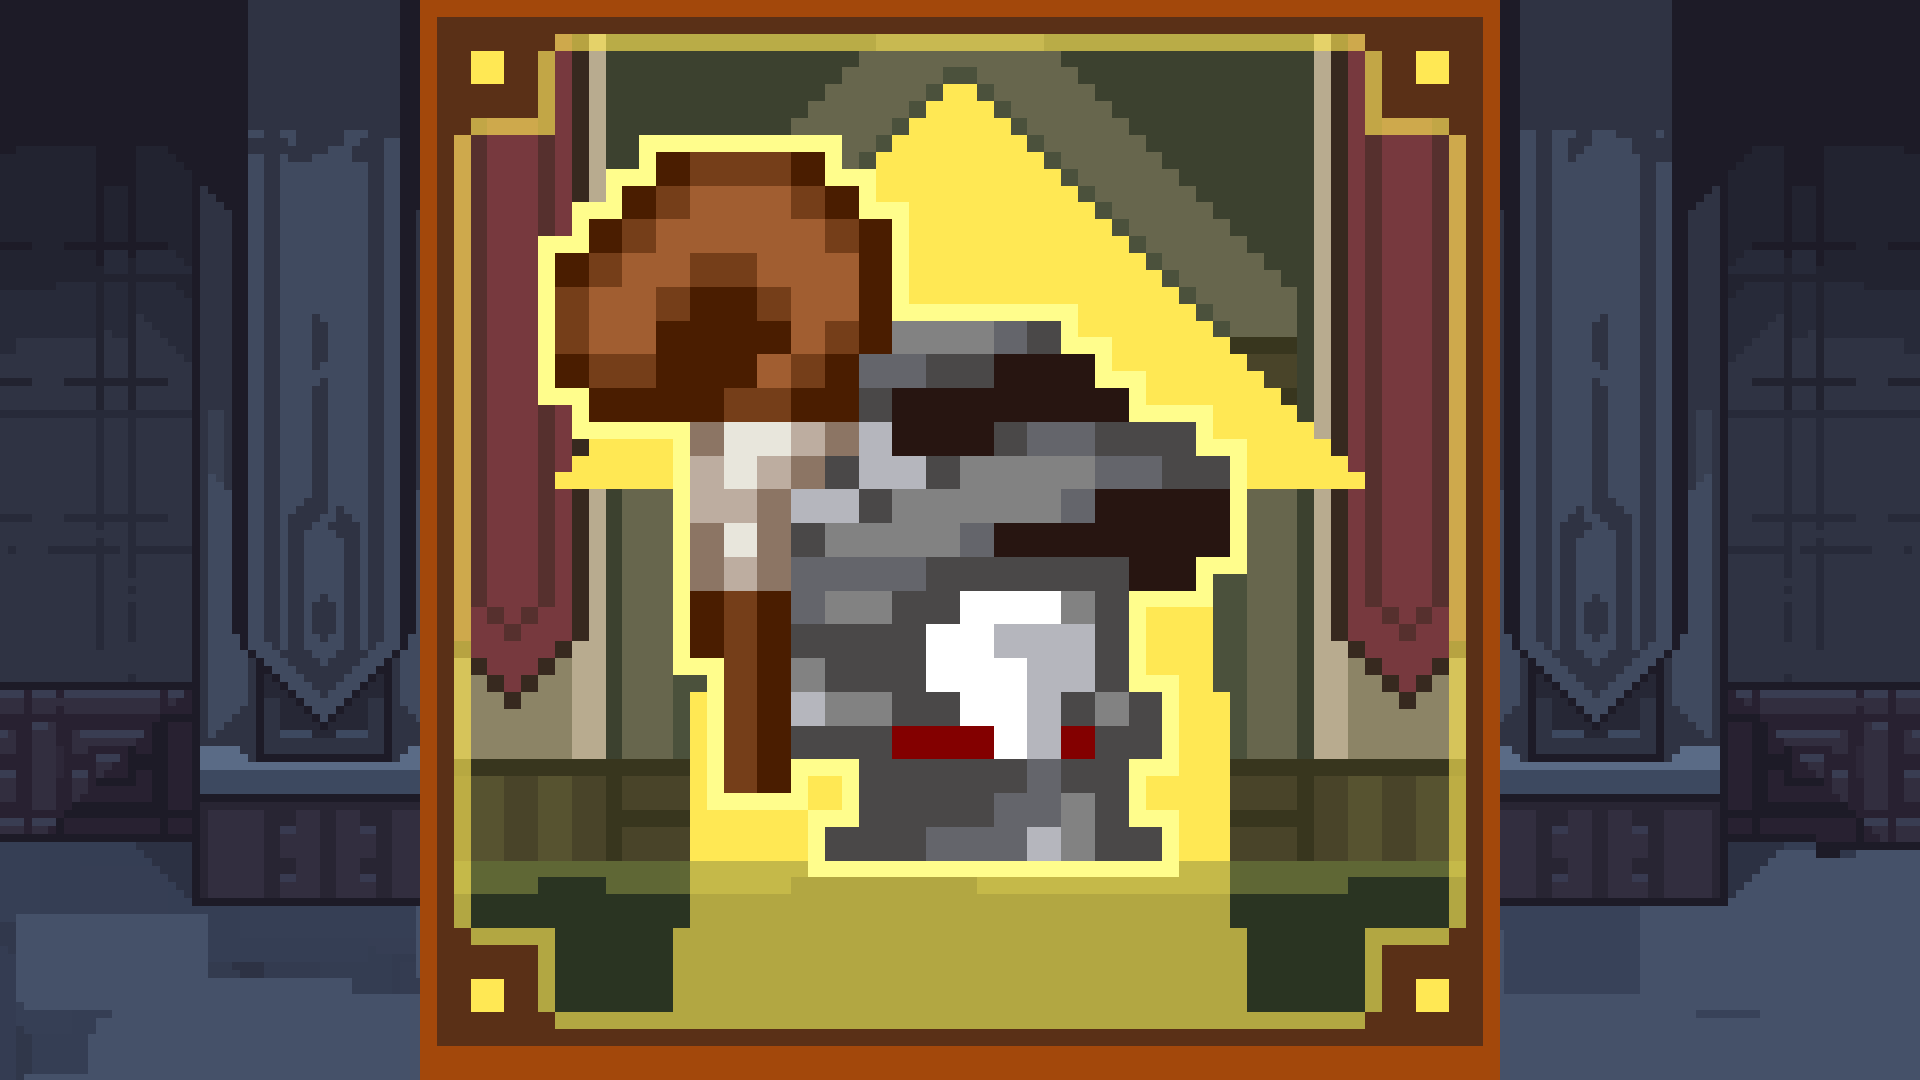 Icon for Wizard